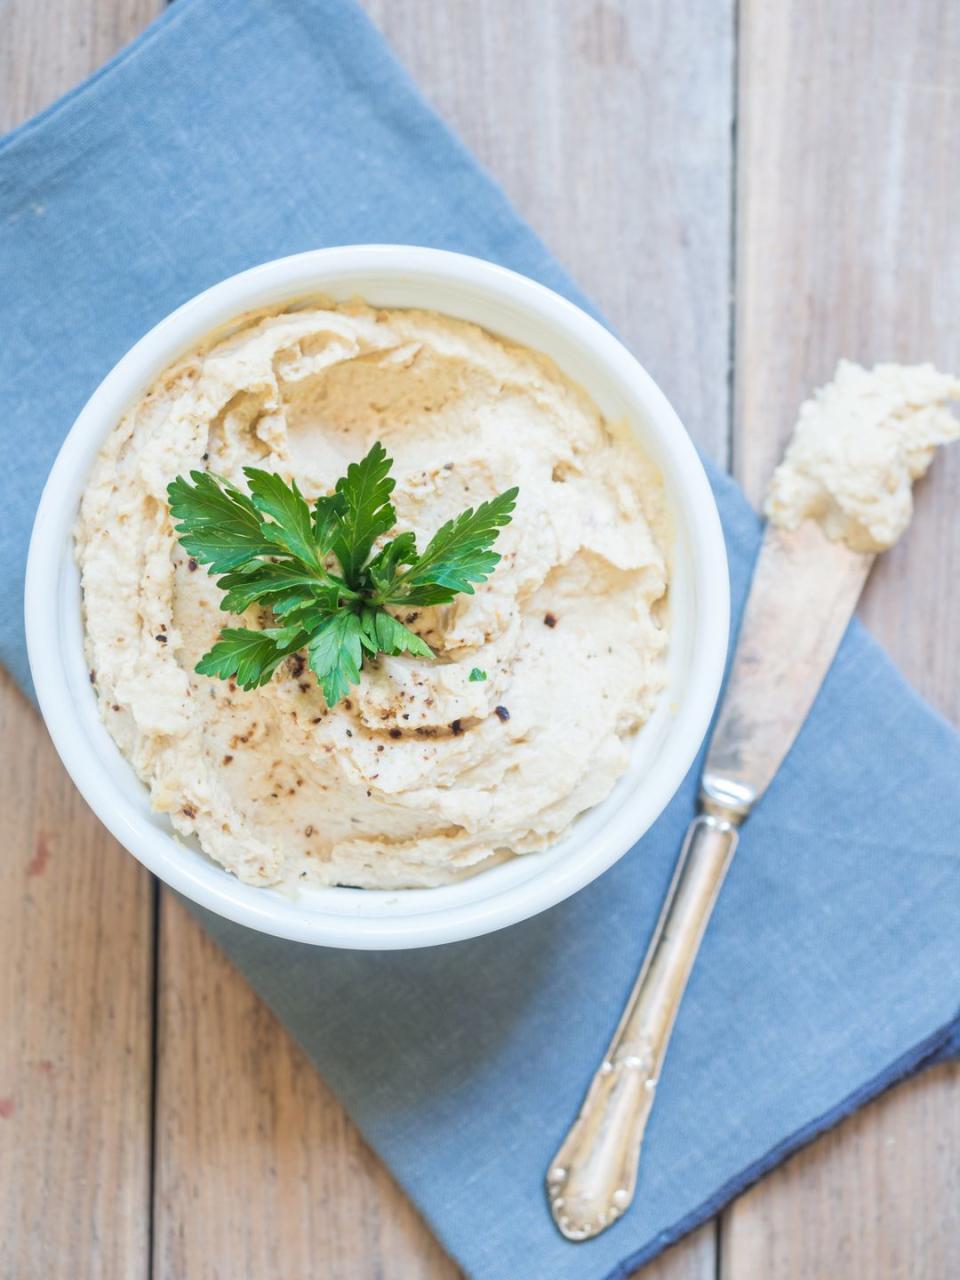 mediterranean diet meal plan hummus in a bowl topped with parsley with knife